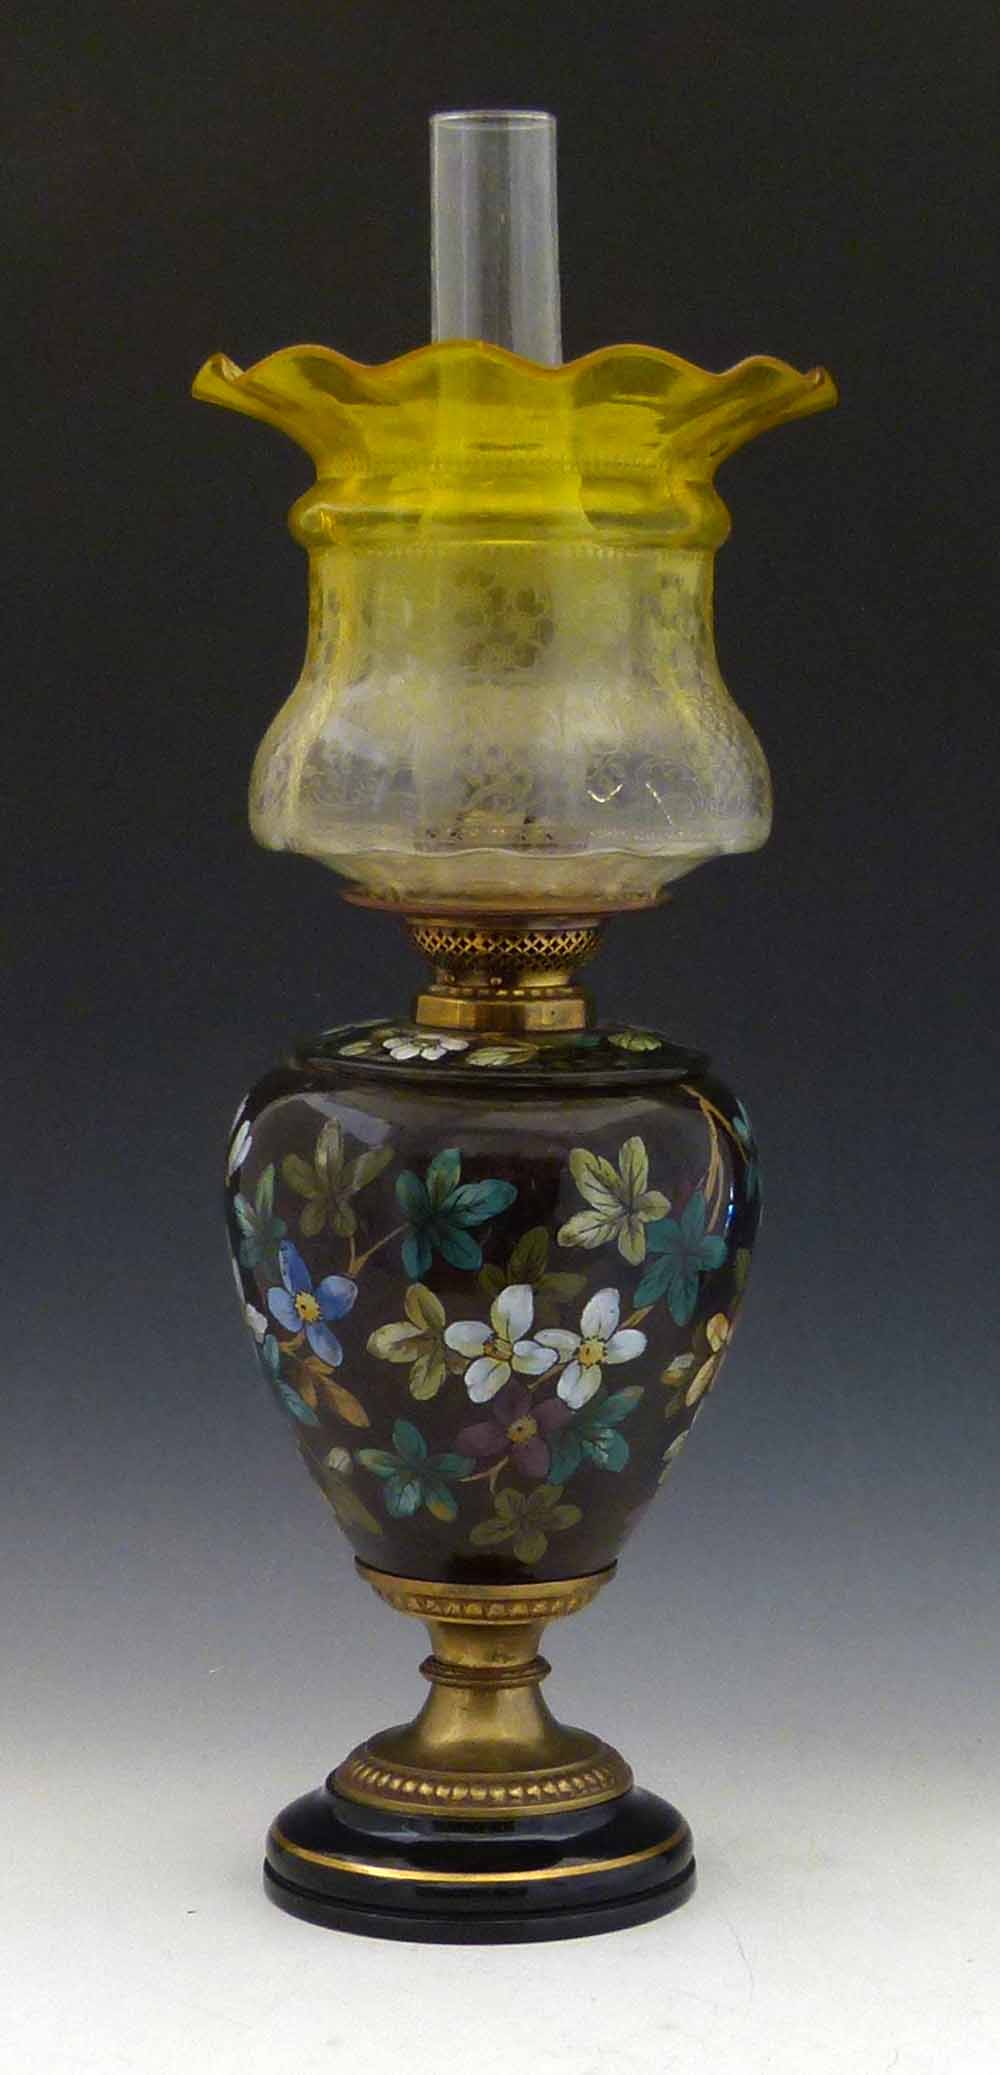 Victorian floral pottery oil lamp, height to burner 37cm, with yellow glass shade.
 
Condition